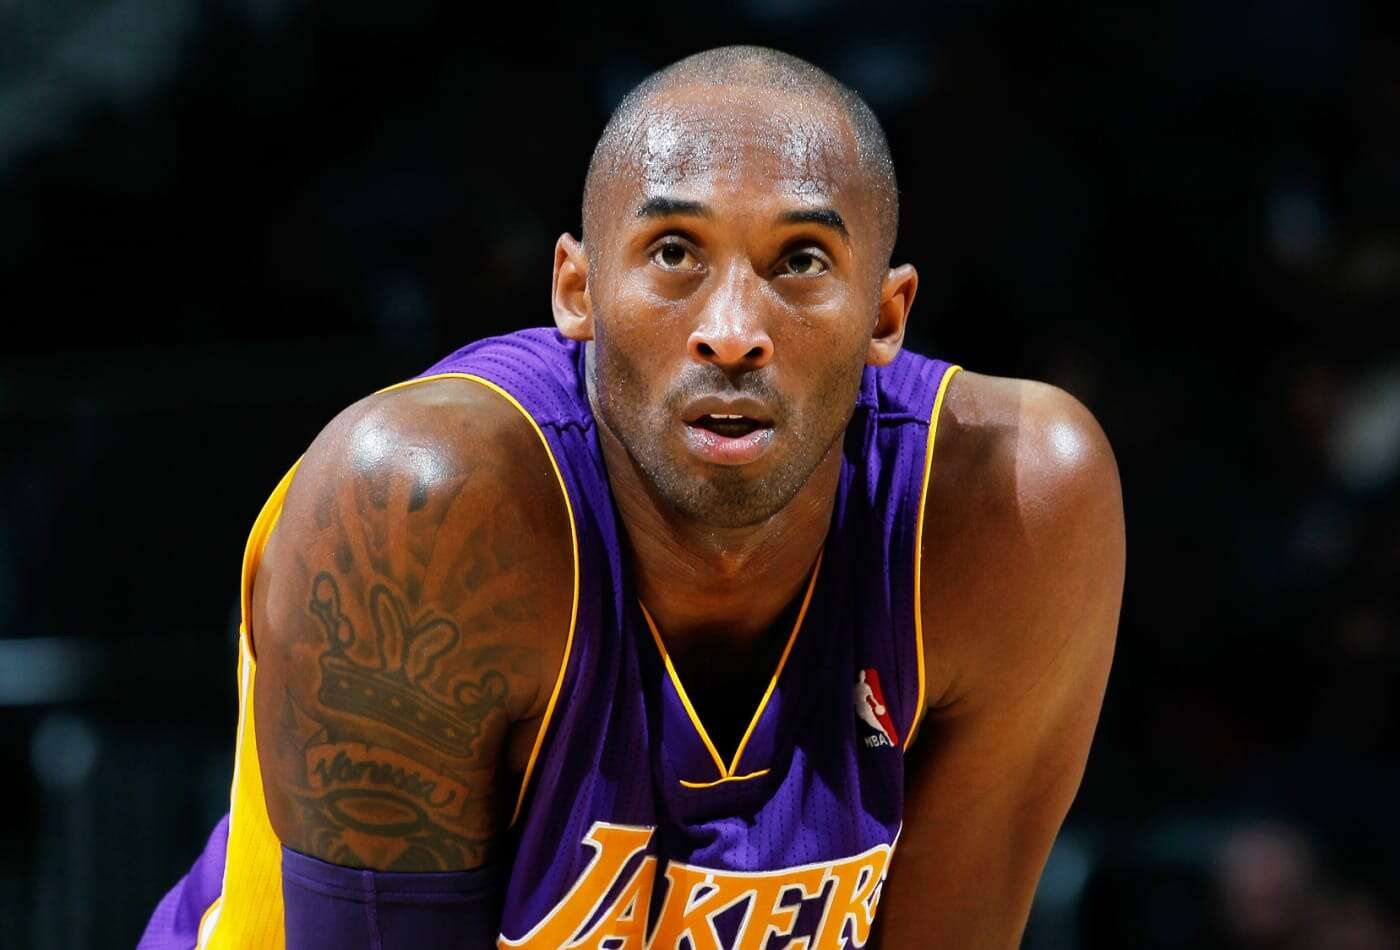 20 Shocking facts you didn't know about Kobe Bryant (With Pictures)